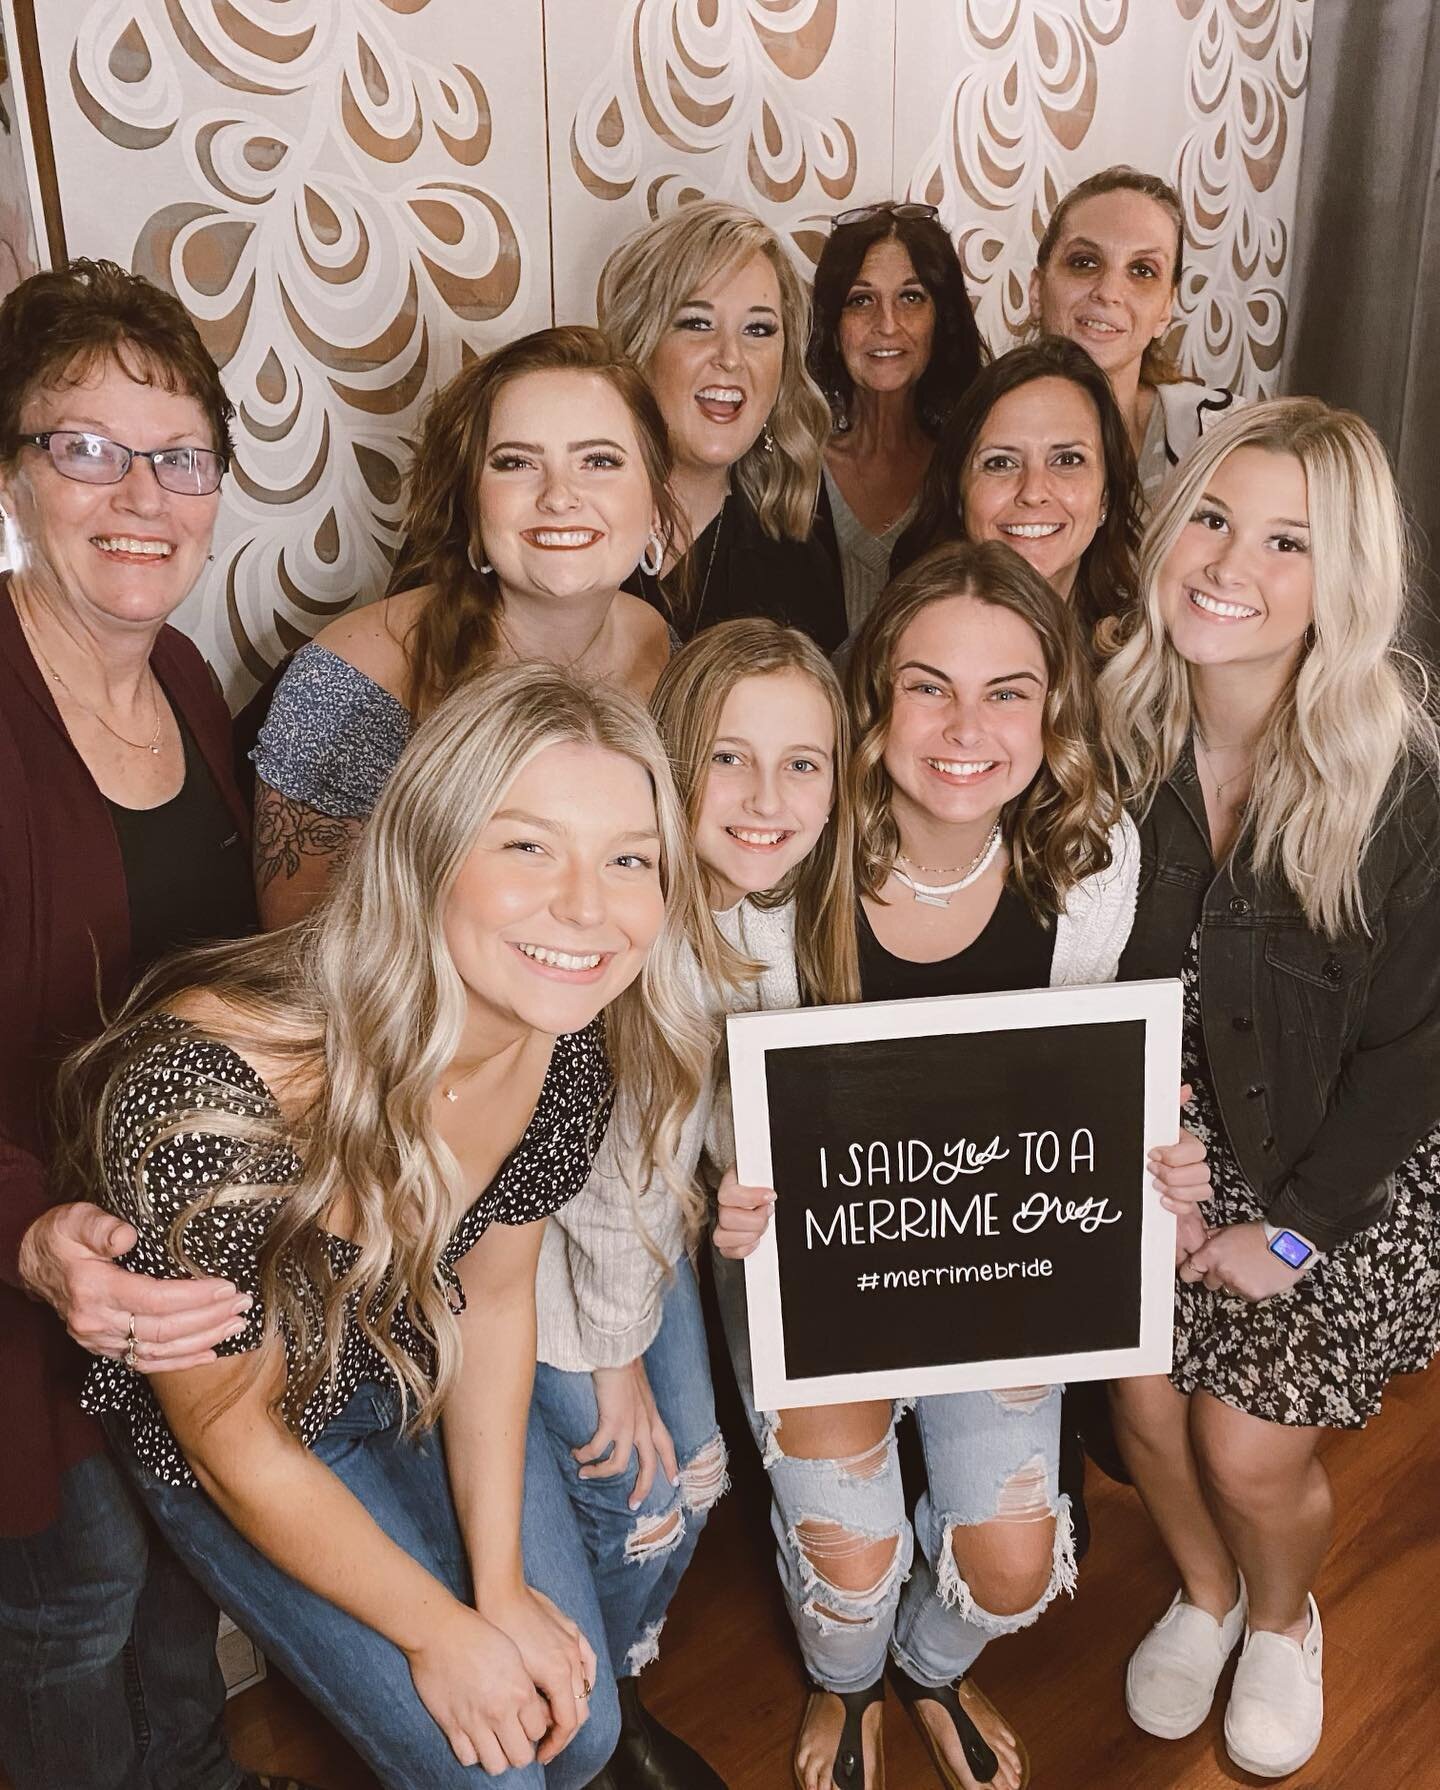 Our bridal parties often say how fun our job must be&hellip;they have no idea how lucky we feel to be a part of their joy and be surrounded by all the love and laughter 🤍